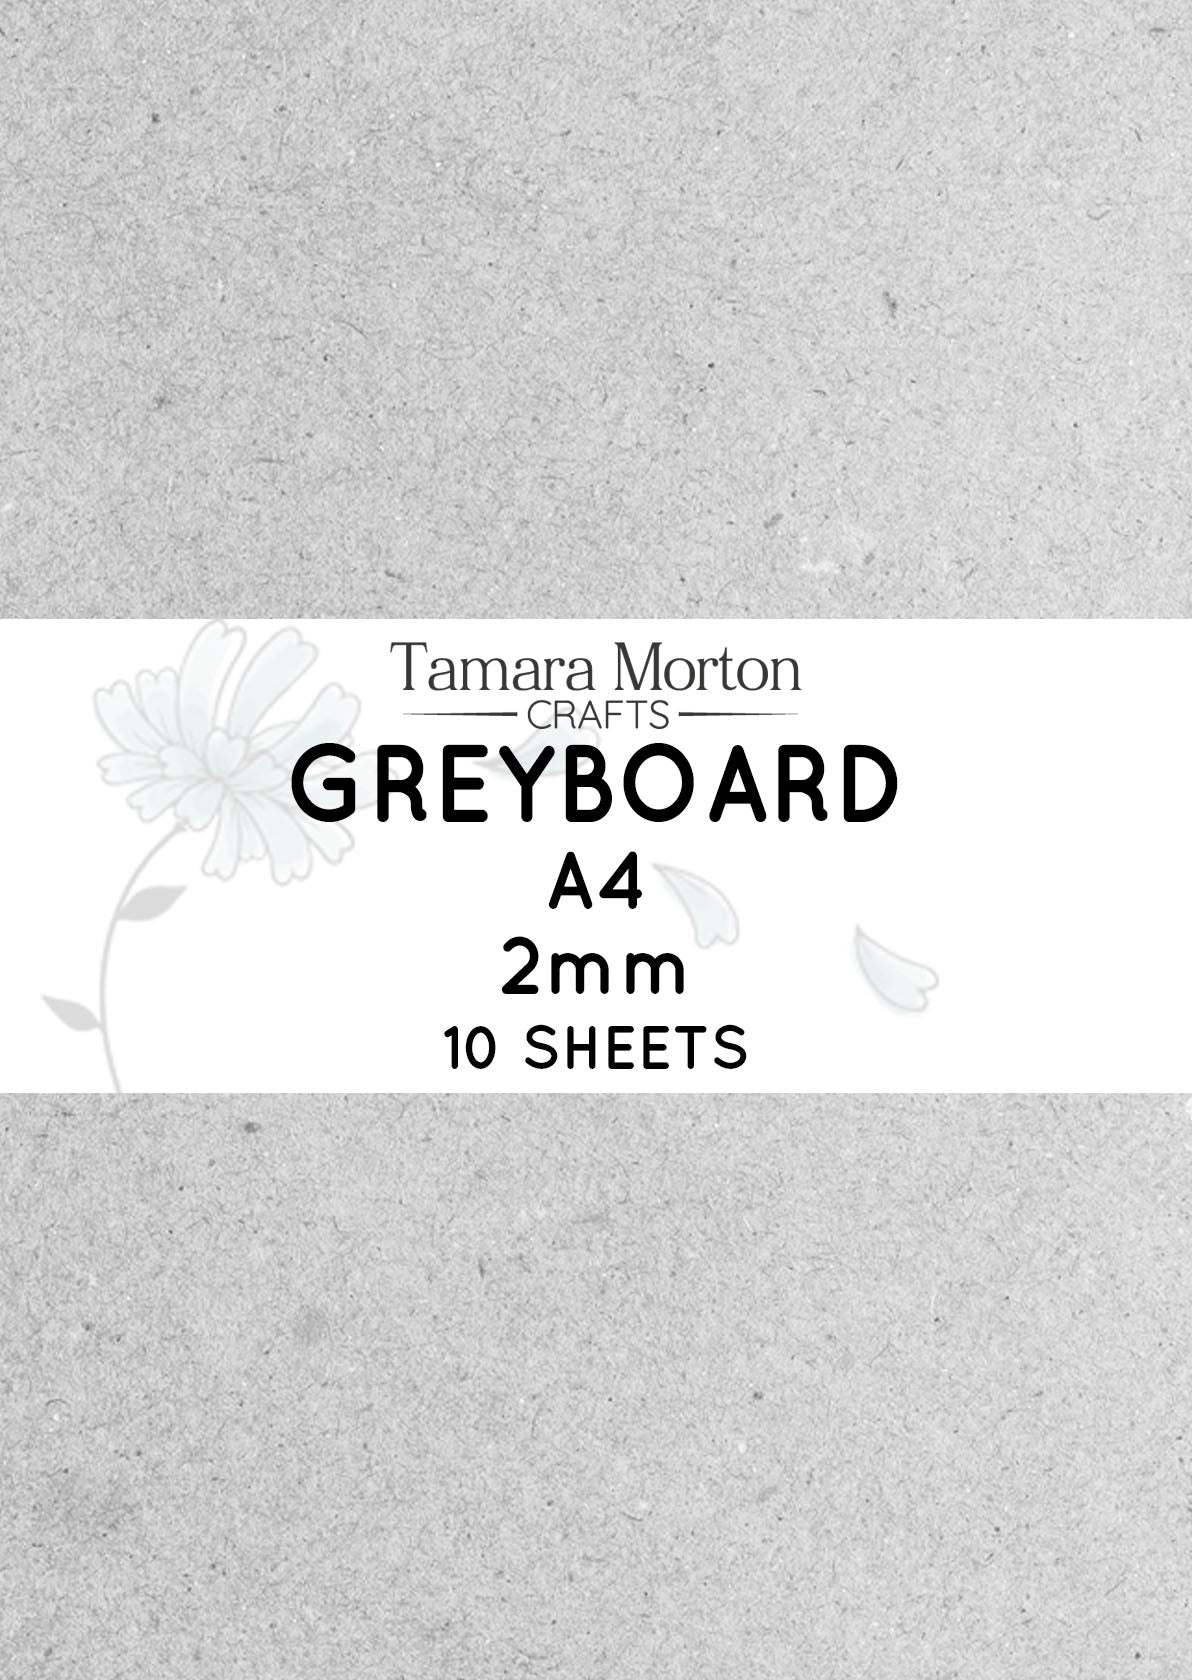 A4 2mm greyboard - 10 sheets